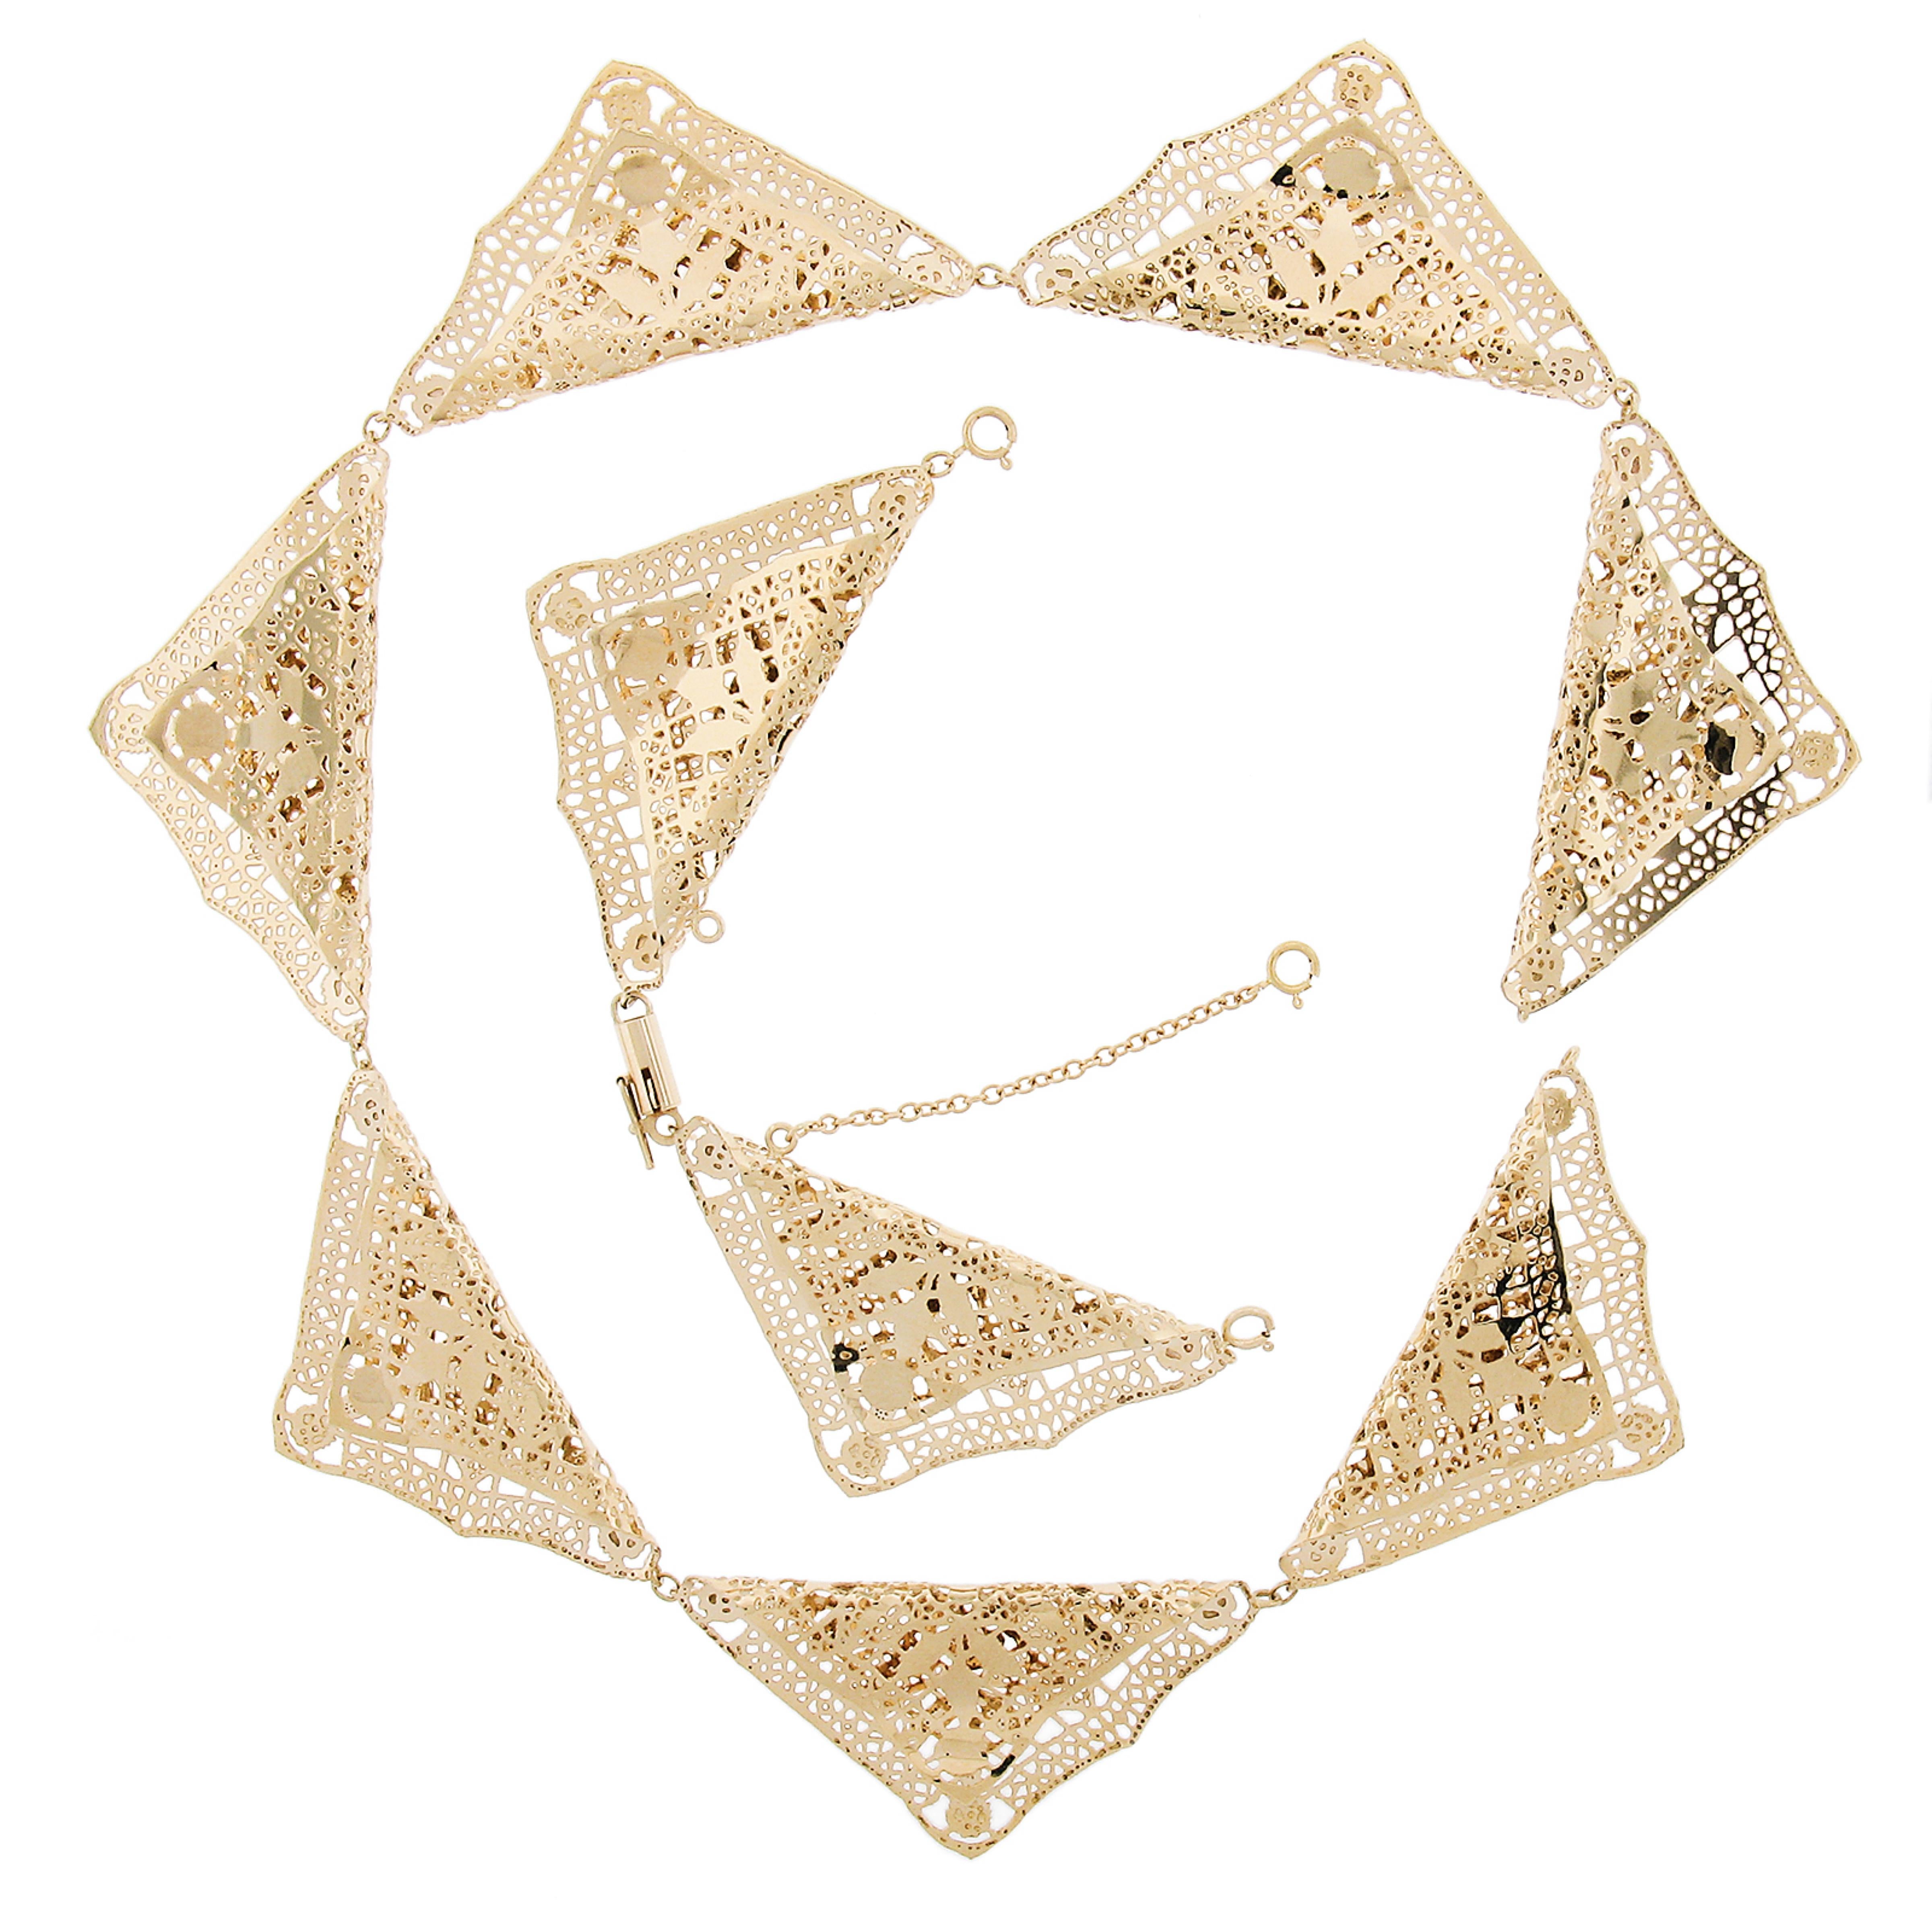 Vintage 14K Gold Polished Lacy Filigree Folded Triangular Shape Chain Necklace In Excellent Condition For Sale In Montclair, NJ